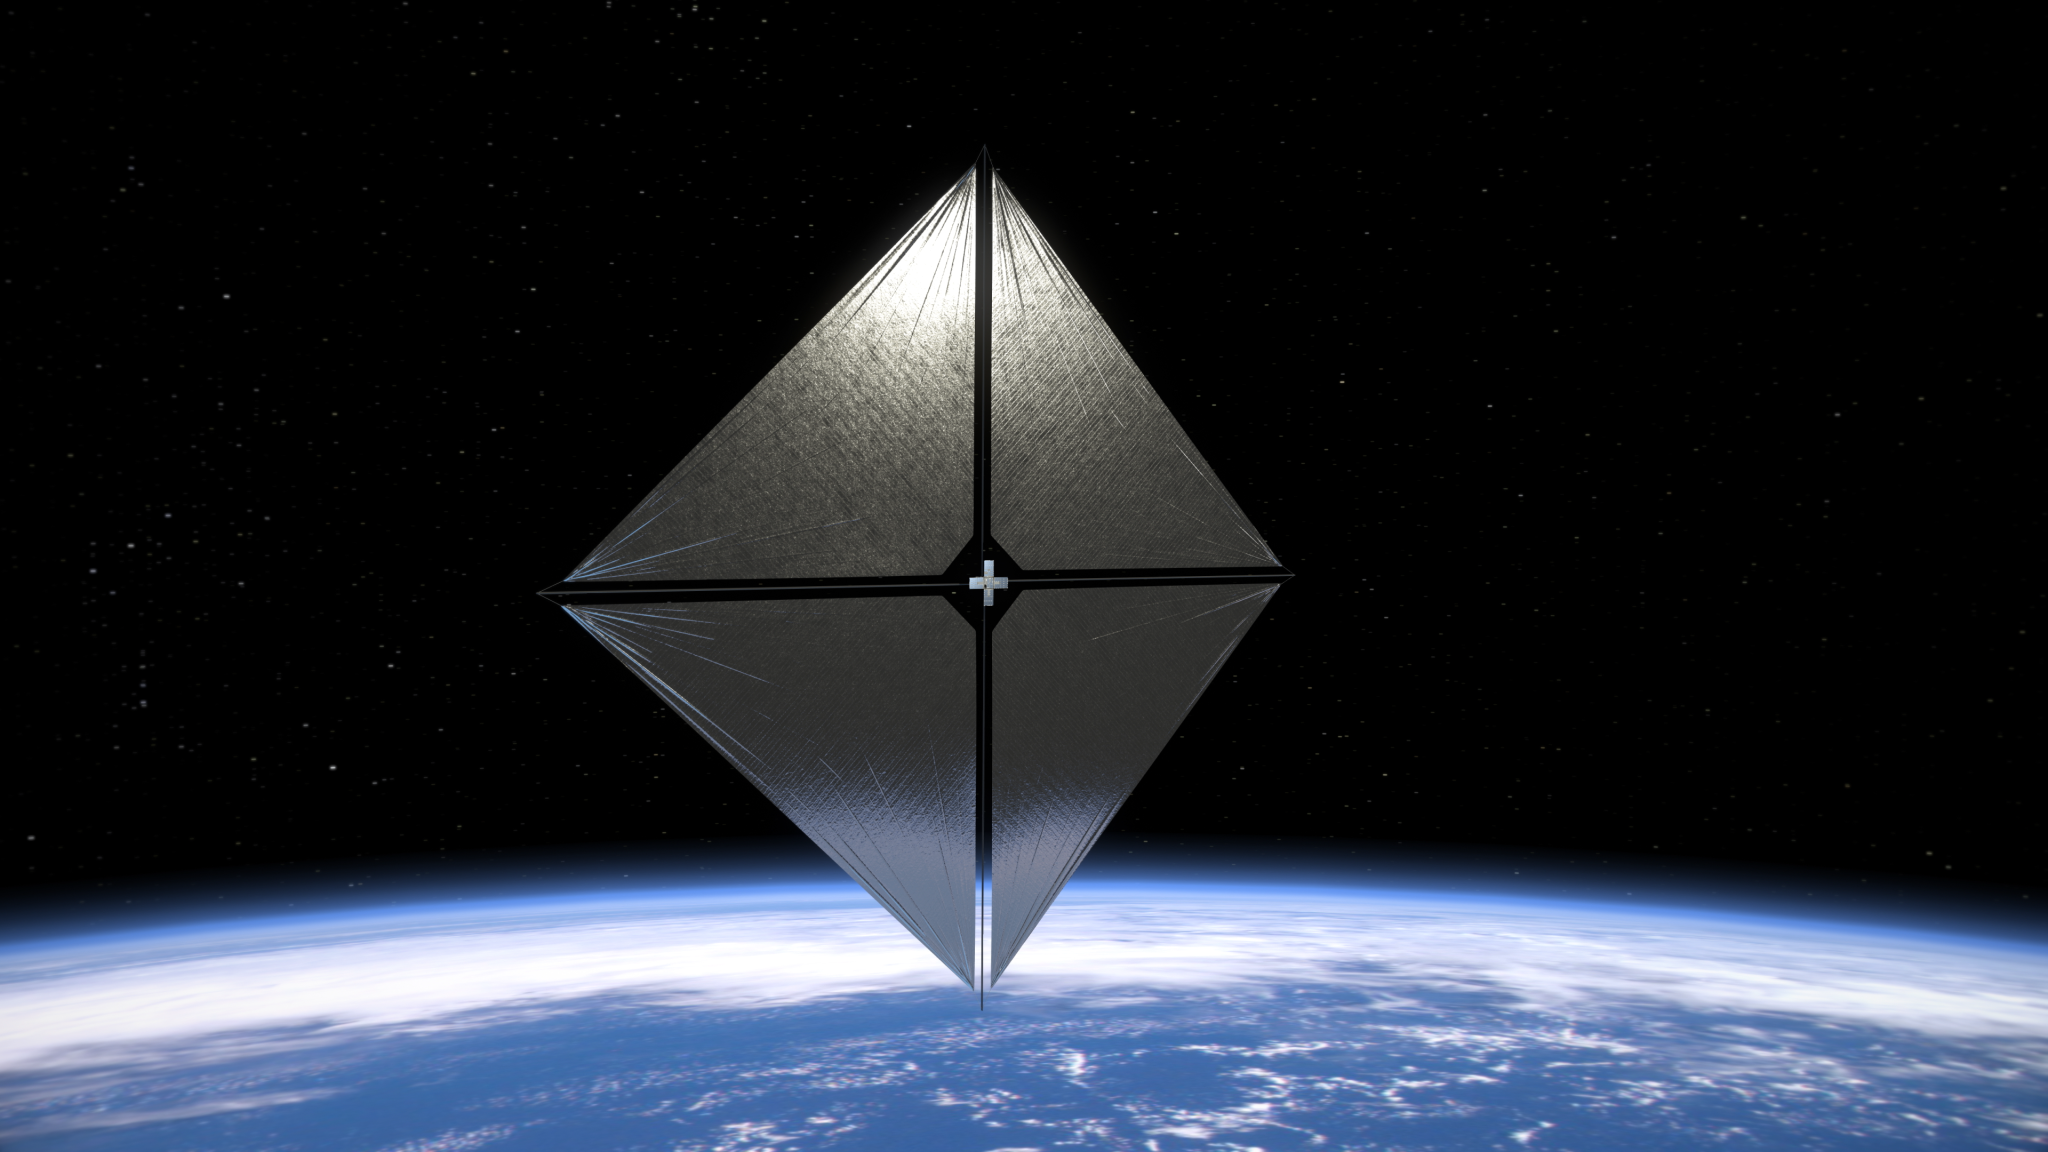 An artist's concept of NASA's Advanced Composite Solar Sail System spacecraft in orbit with the Sun behind and the curve of the Earth visible at the bottom.